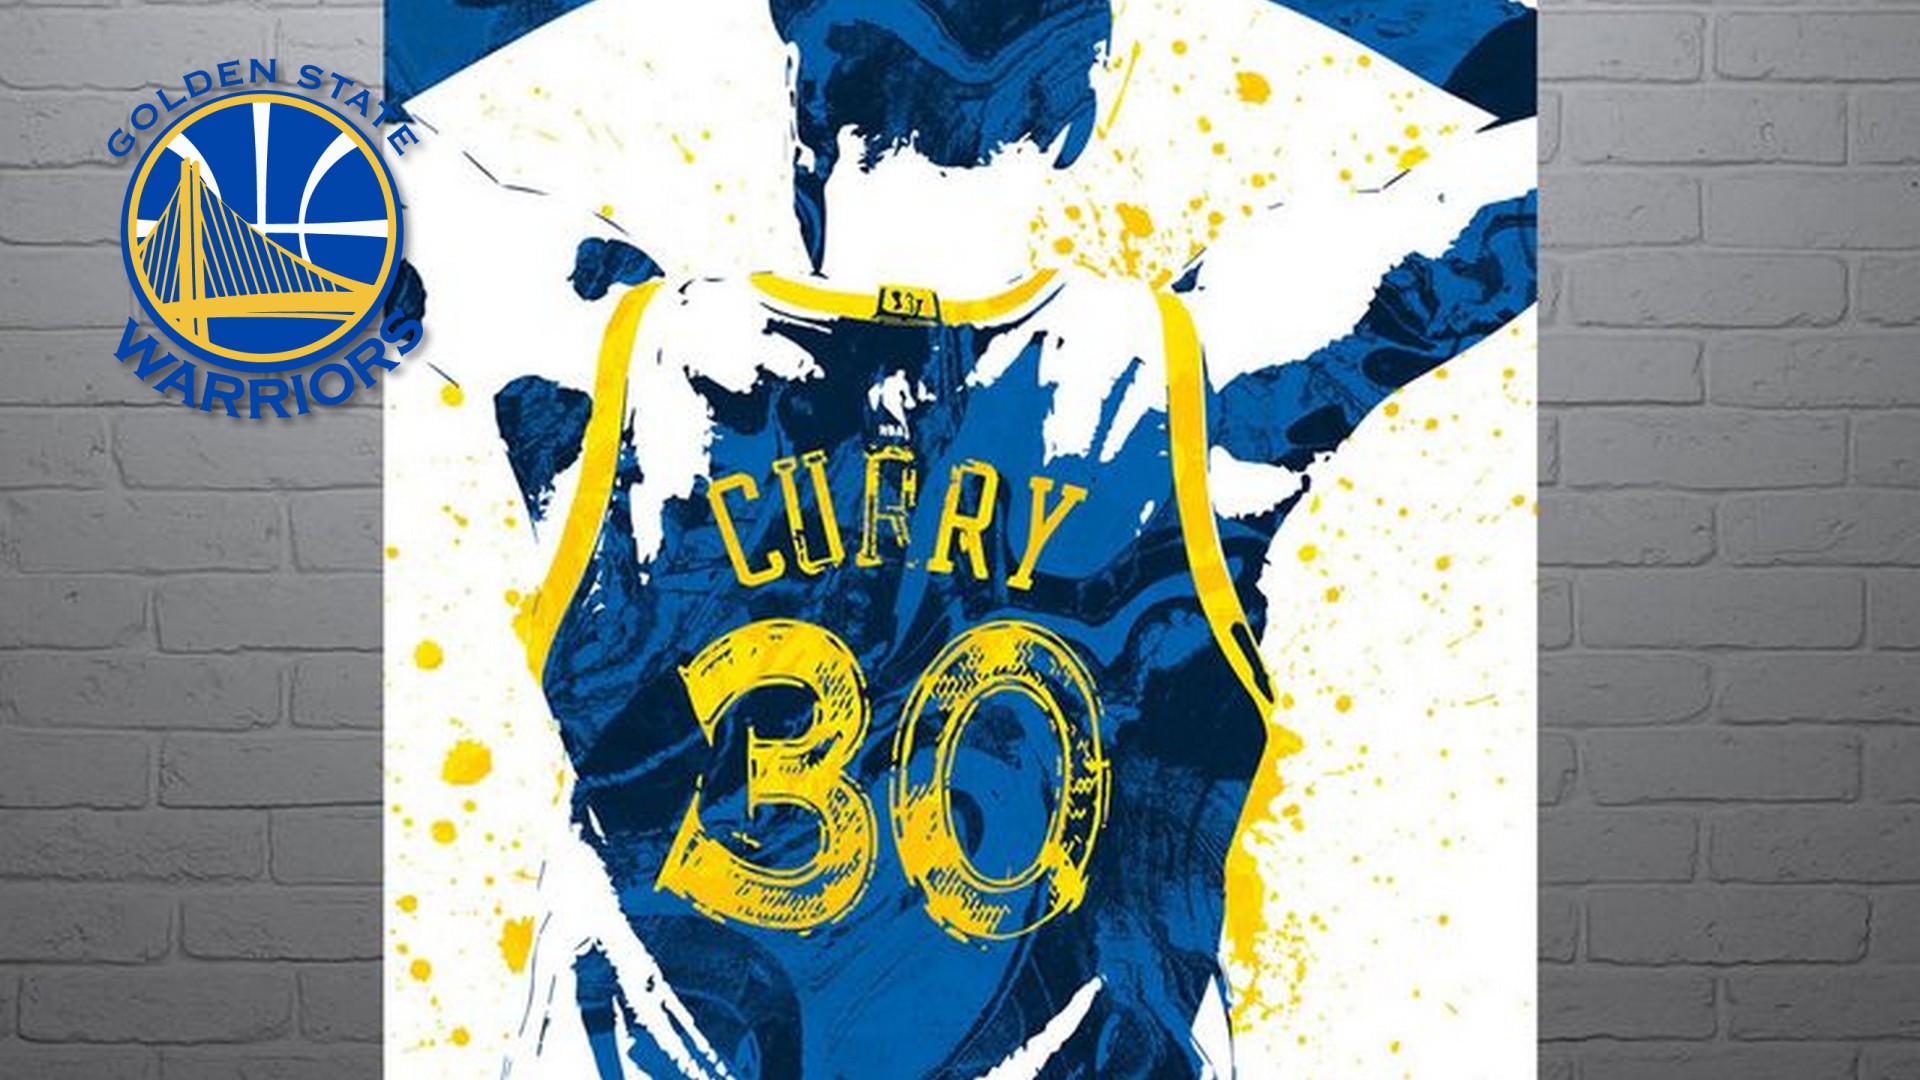 stephen curry wallpaper,blue,product,yellow,t shirt,jersey